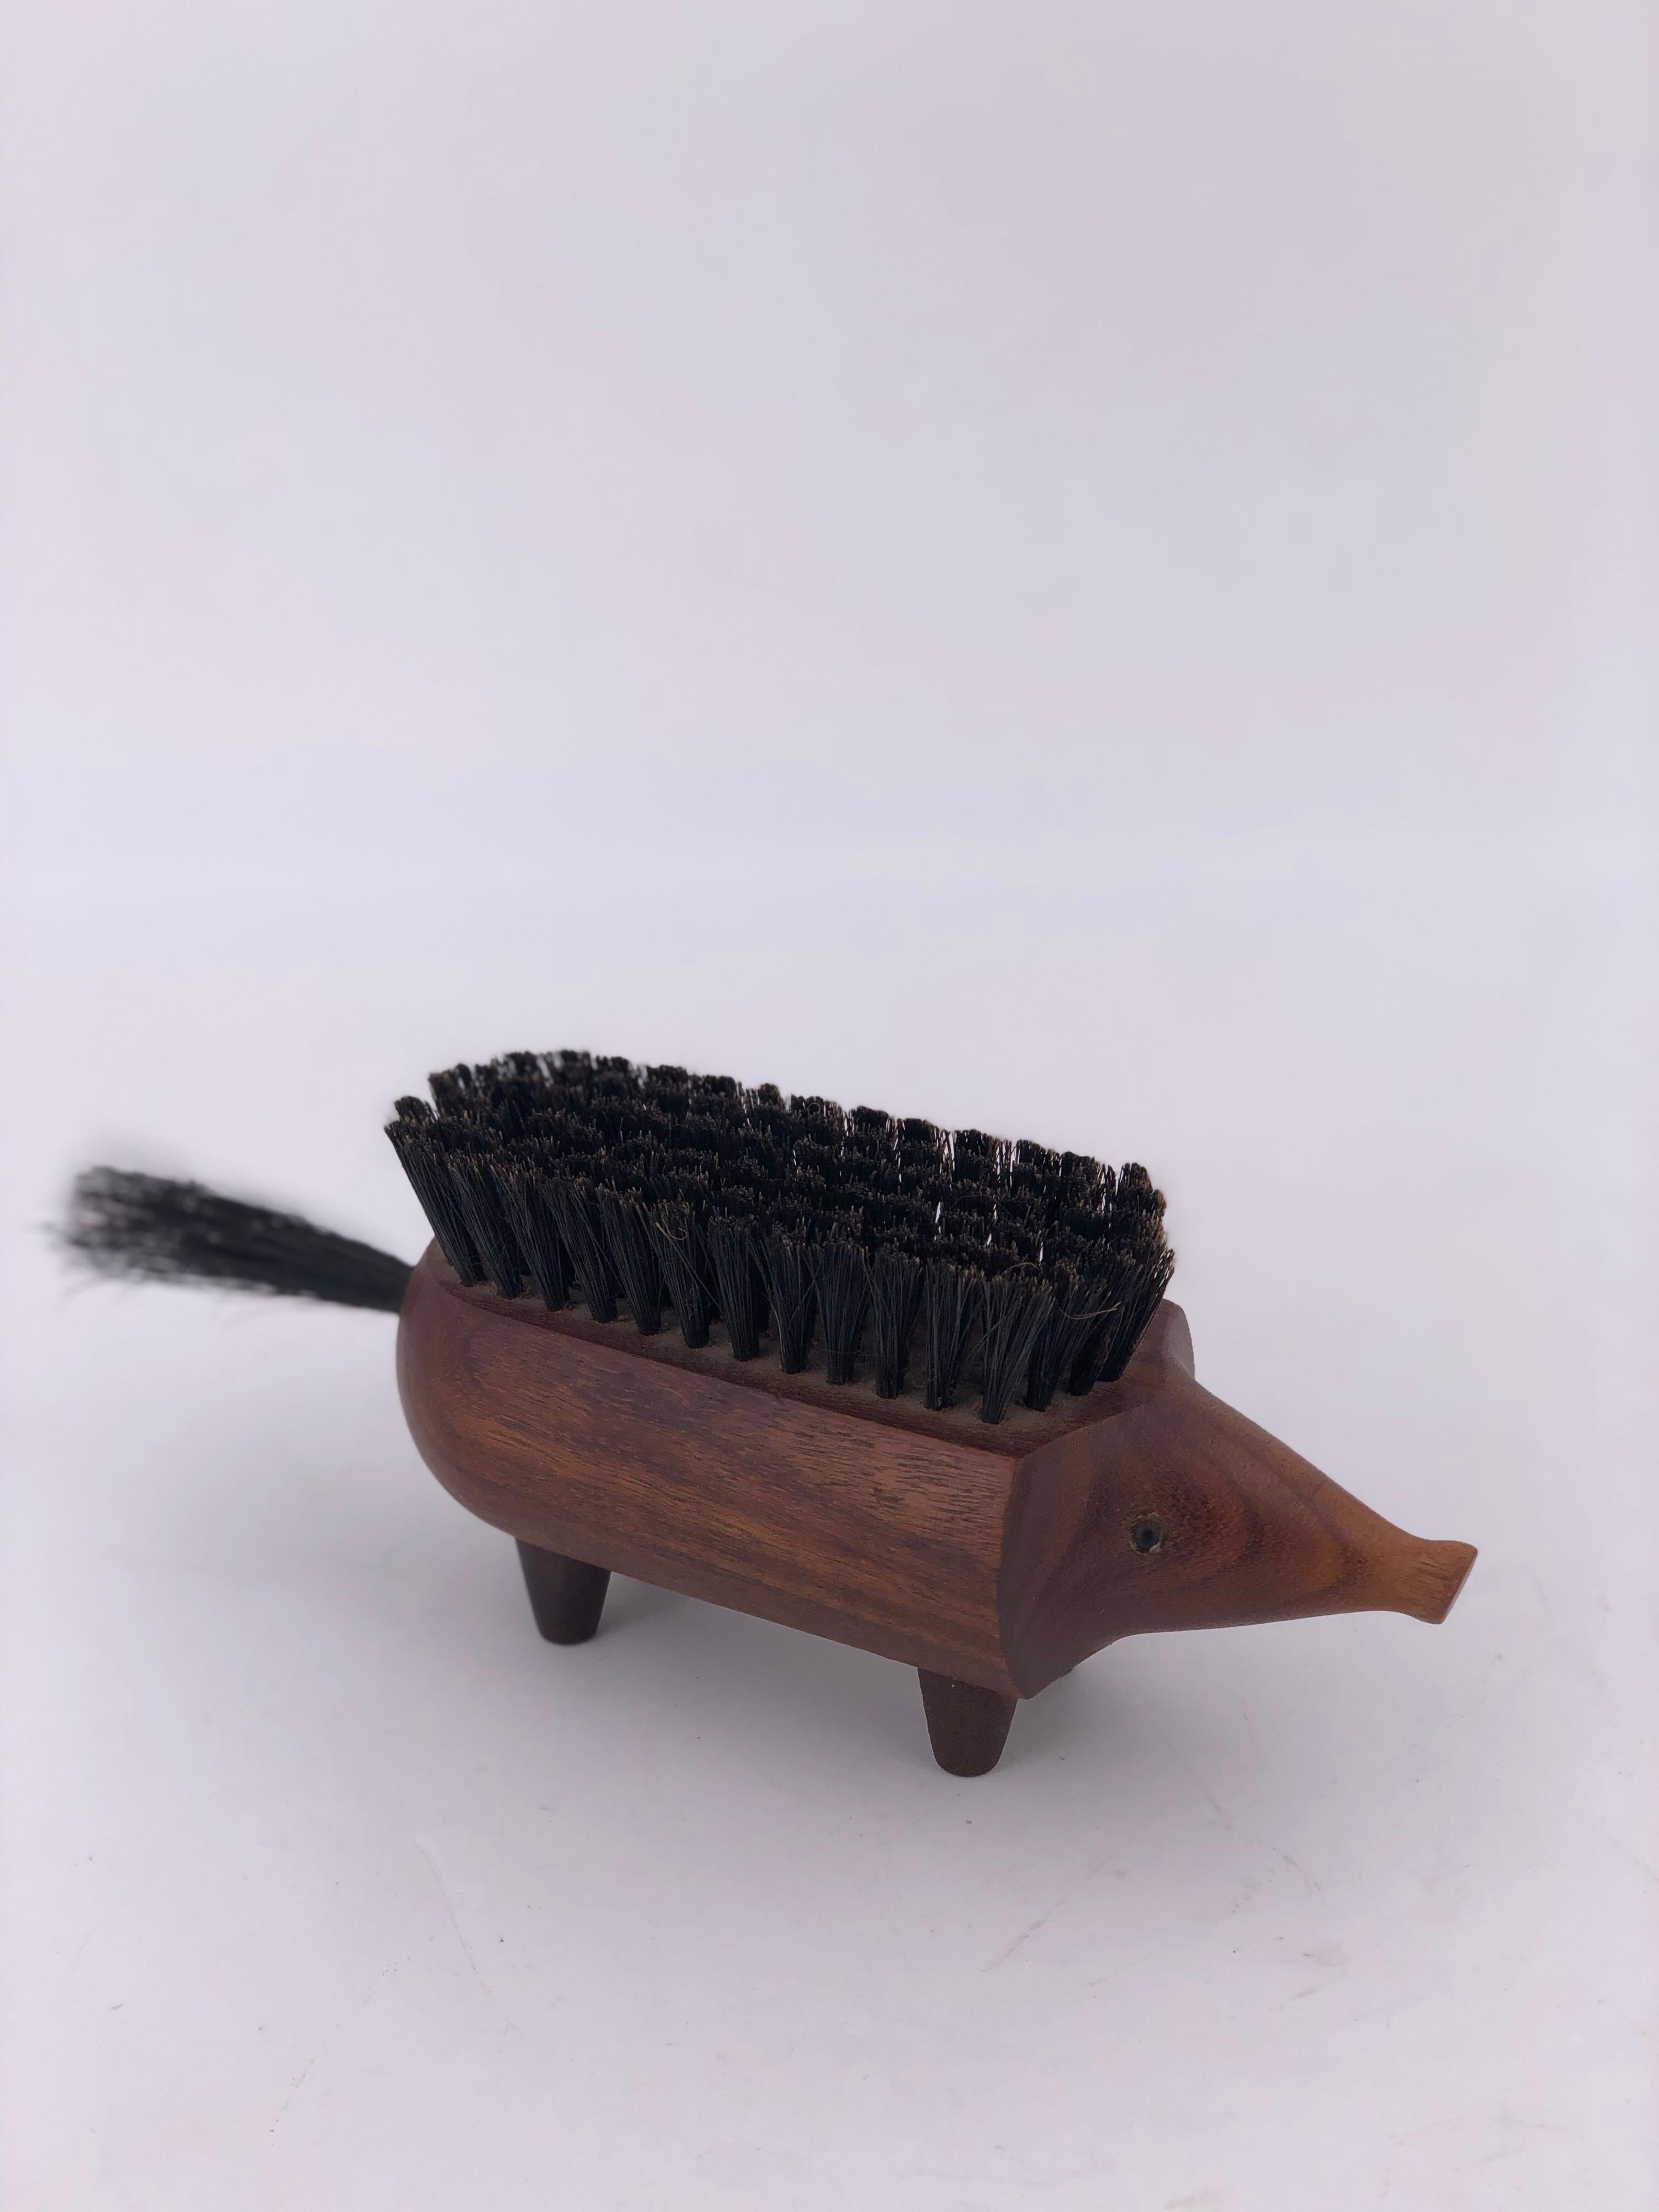 Whimsical and very rare teak carved shoe brushed in the manner of a hedgehog, circa 1950s made in Denmark a very rare and unique piece.